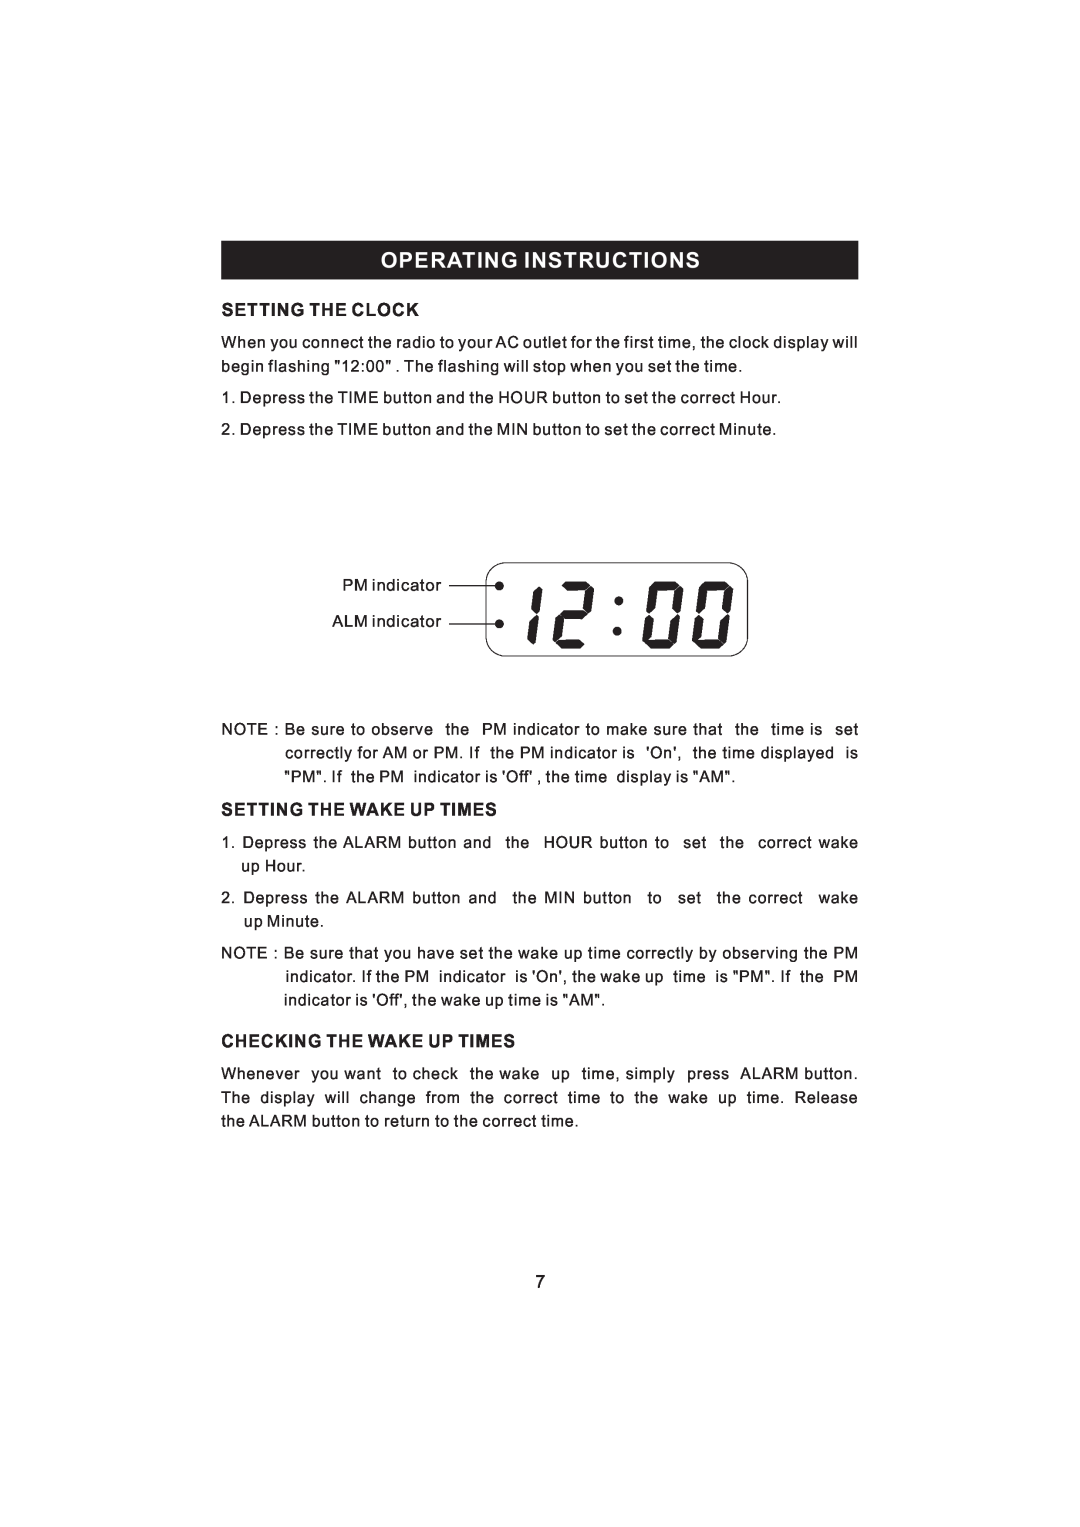 Jensen KT2056 owner manual Operating Instructions, Setting The Clock, Setting The Wake Up Times, Checking The Wake Up Times 